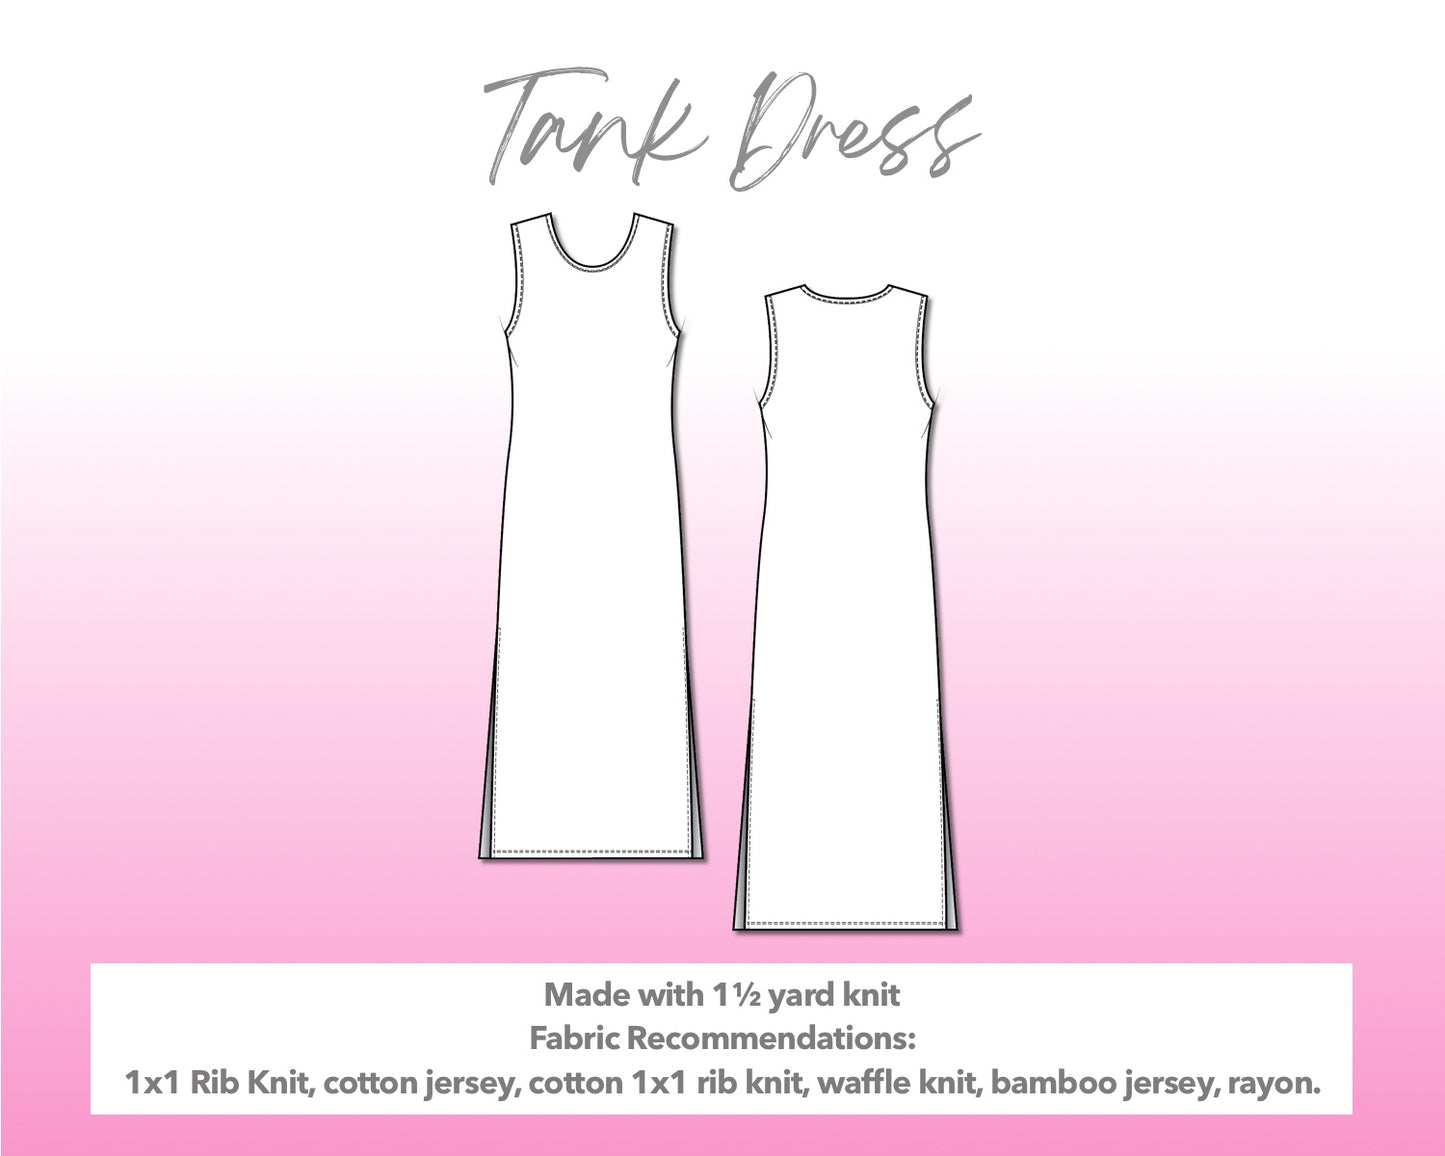 Illustration and detailed description for Tank Long Knit Dress sewing pattern.